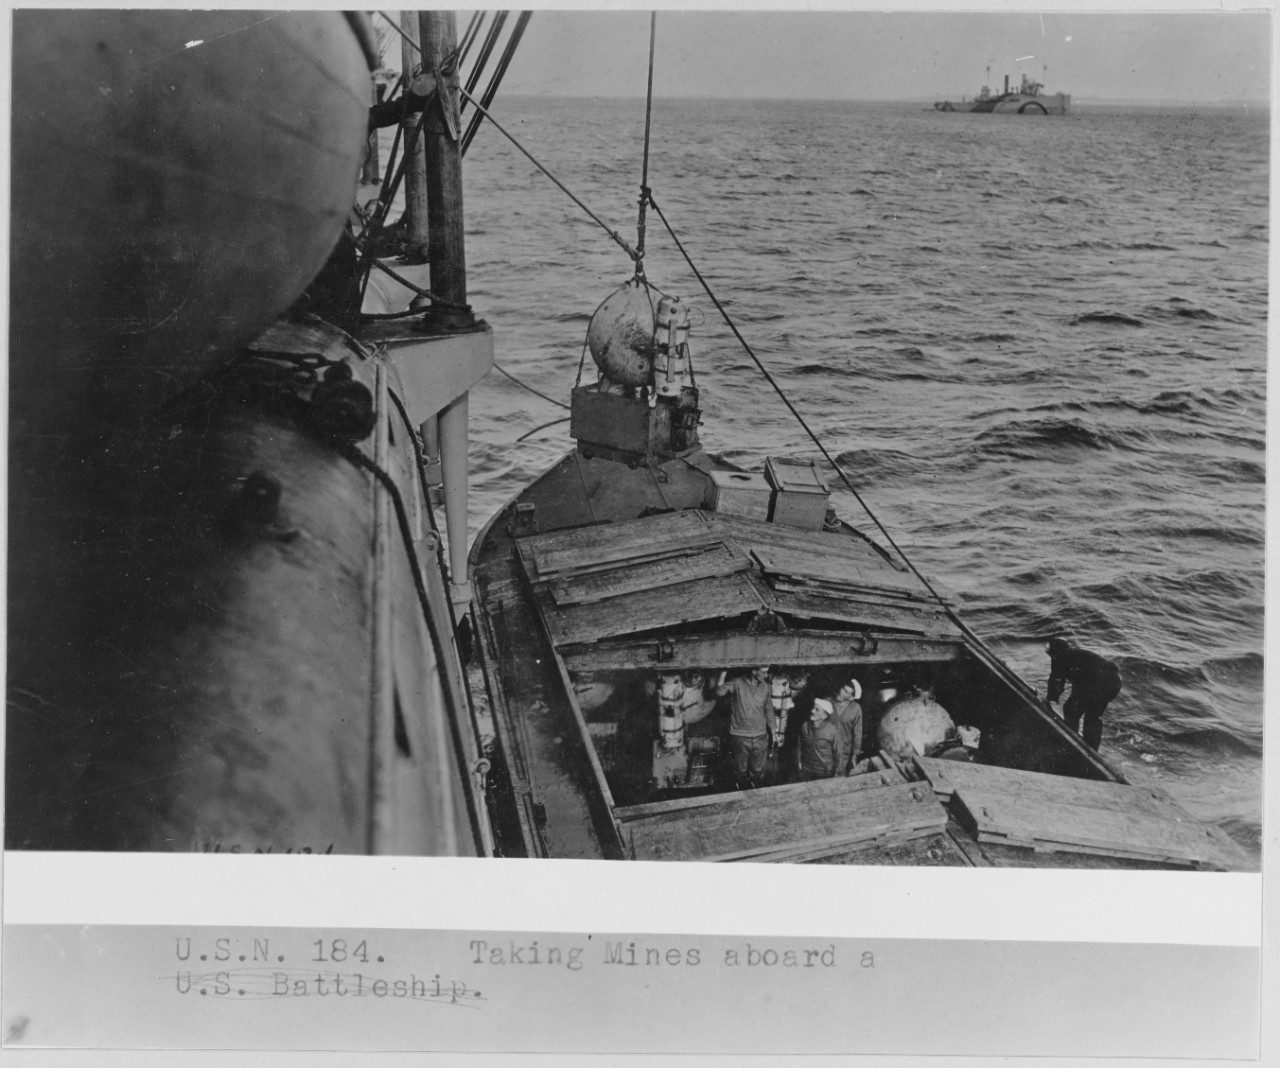 Taking mines aboard. Hoisting mines out of the barge onto a minelayer